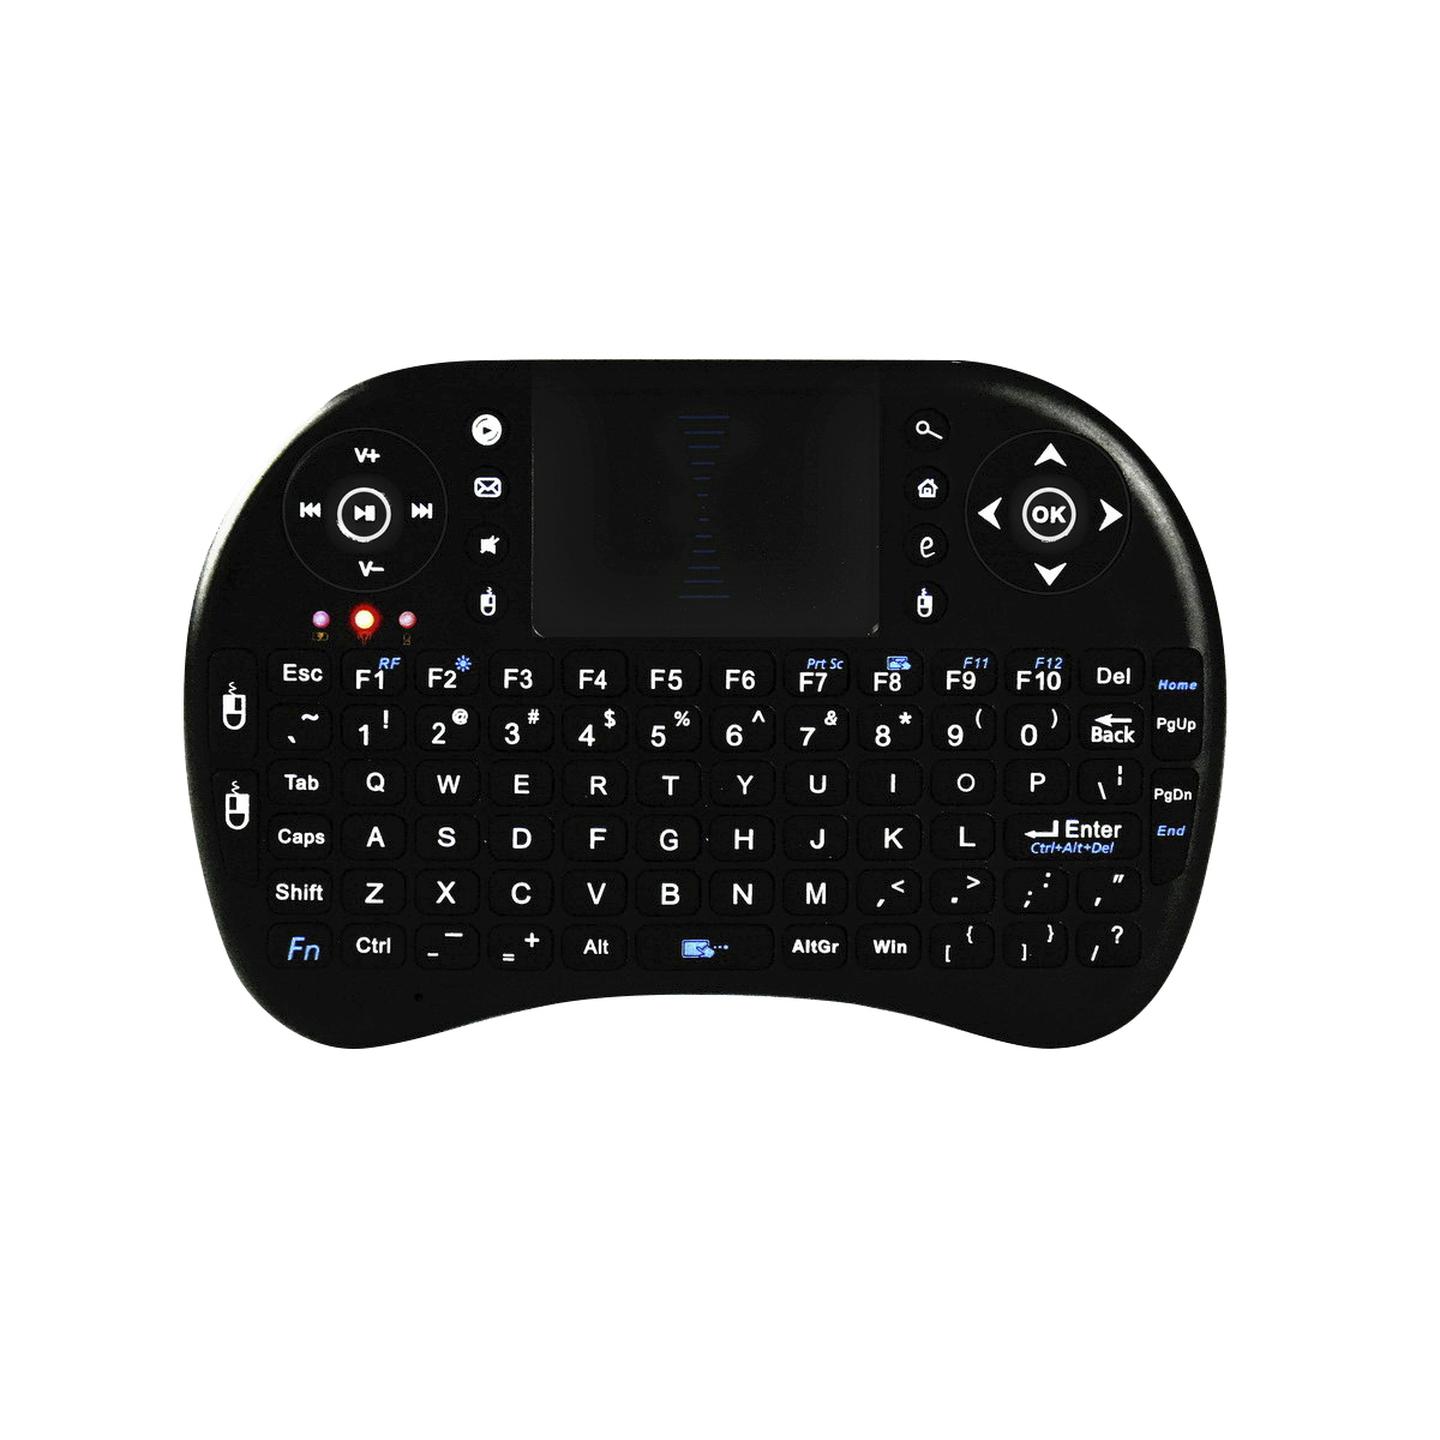 Mini Wireless Keyboard with Touchpad Mouse